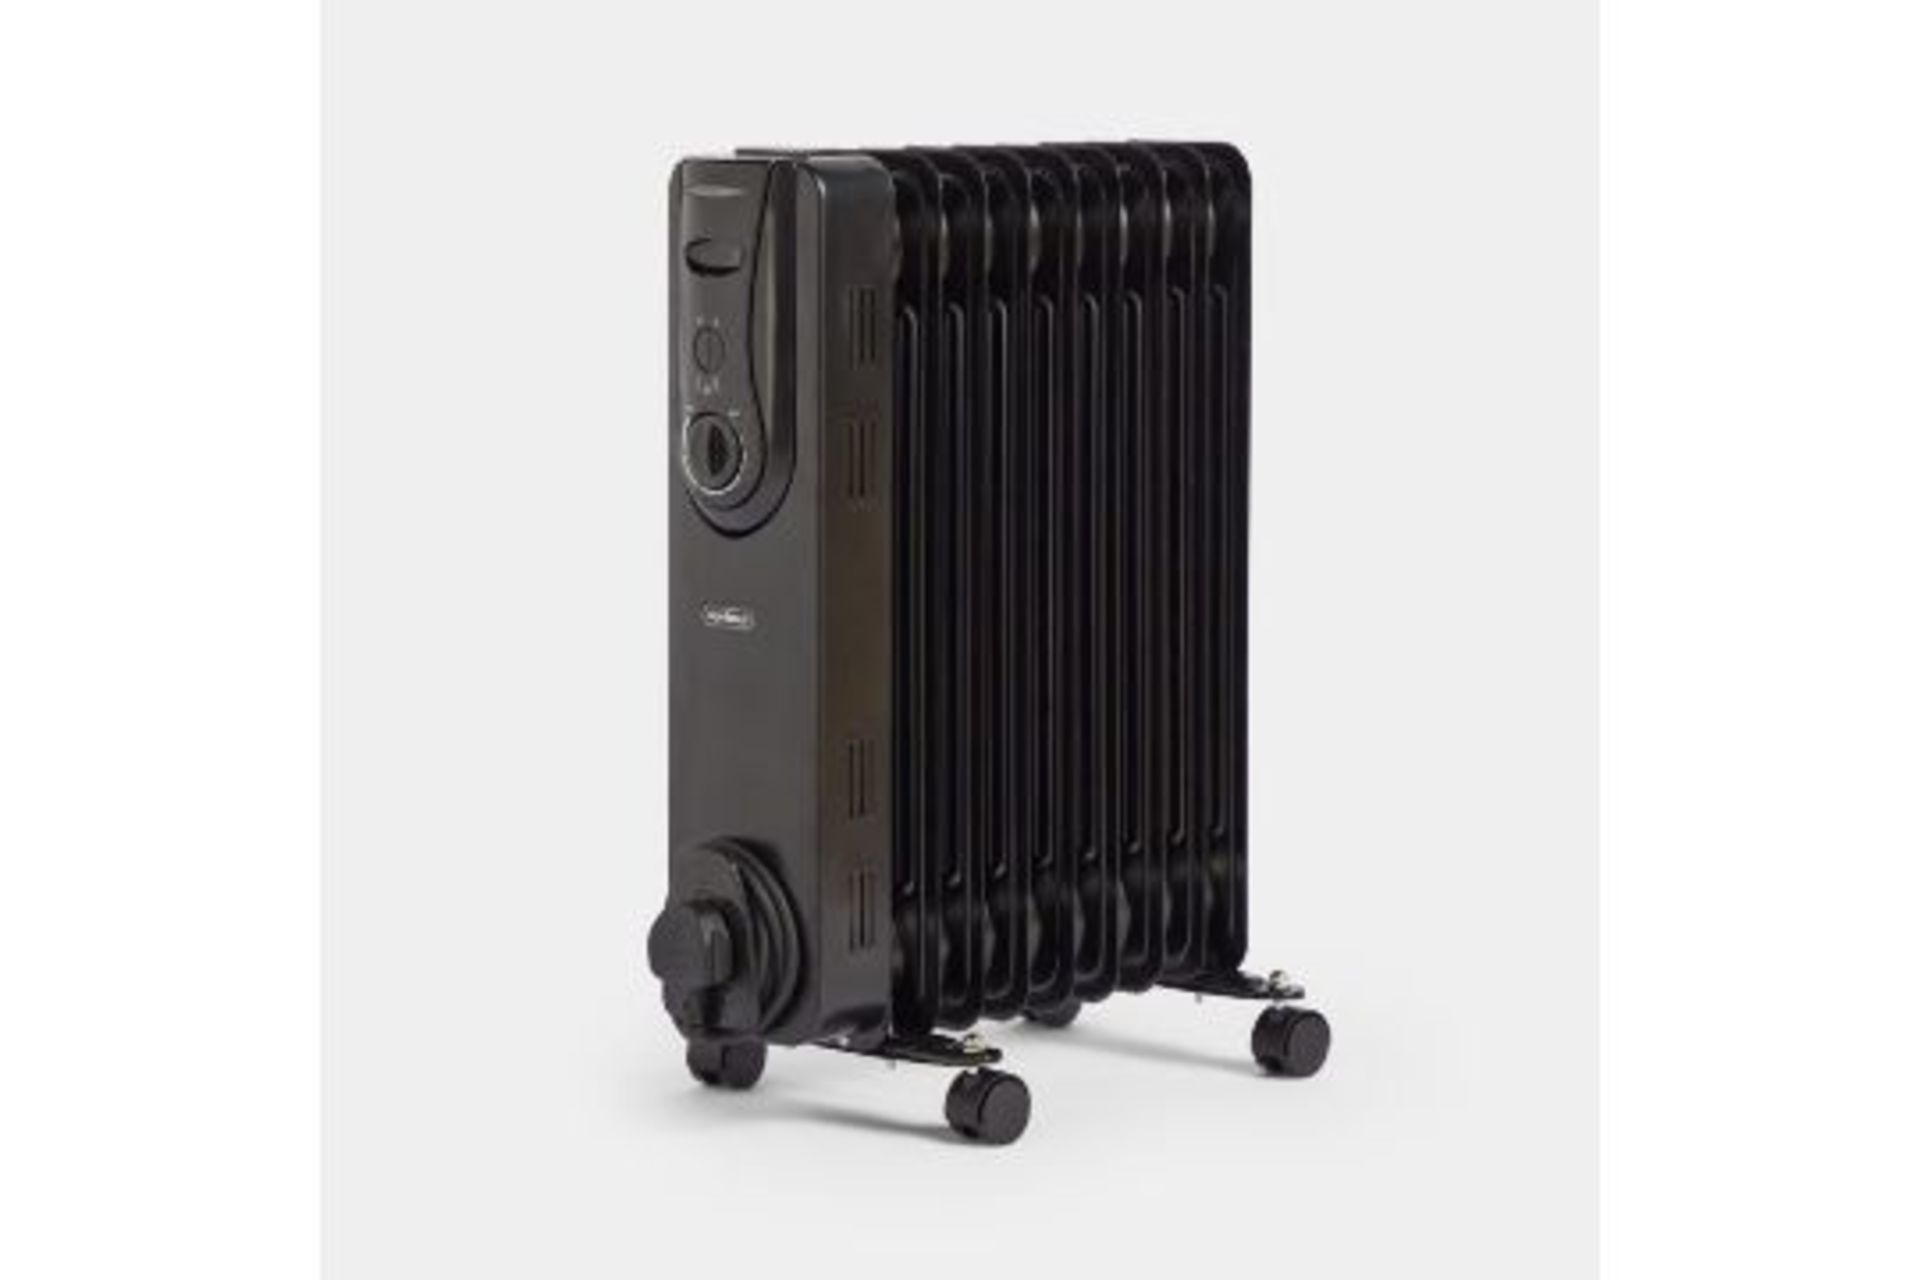 9 Fin 2000W Oil Filled Radiator - Black. - ER48. Features 9 oil-filled fins to effectively heat